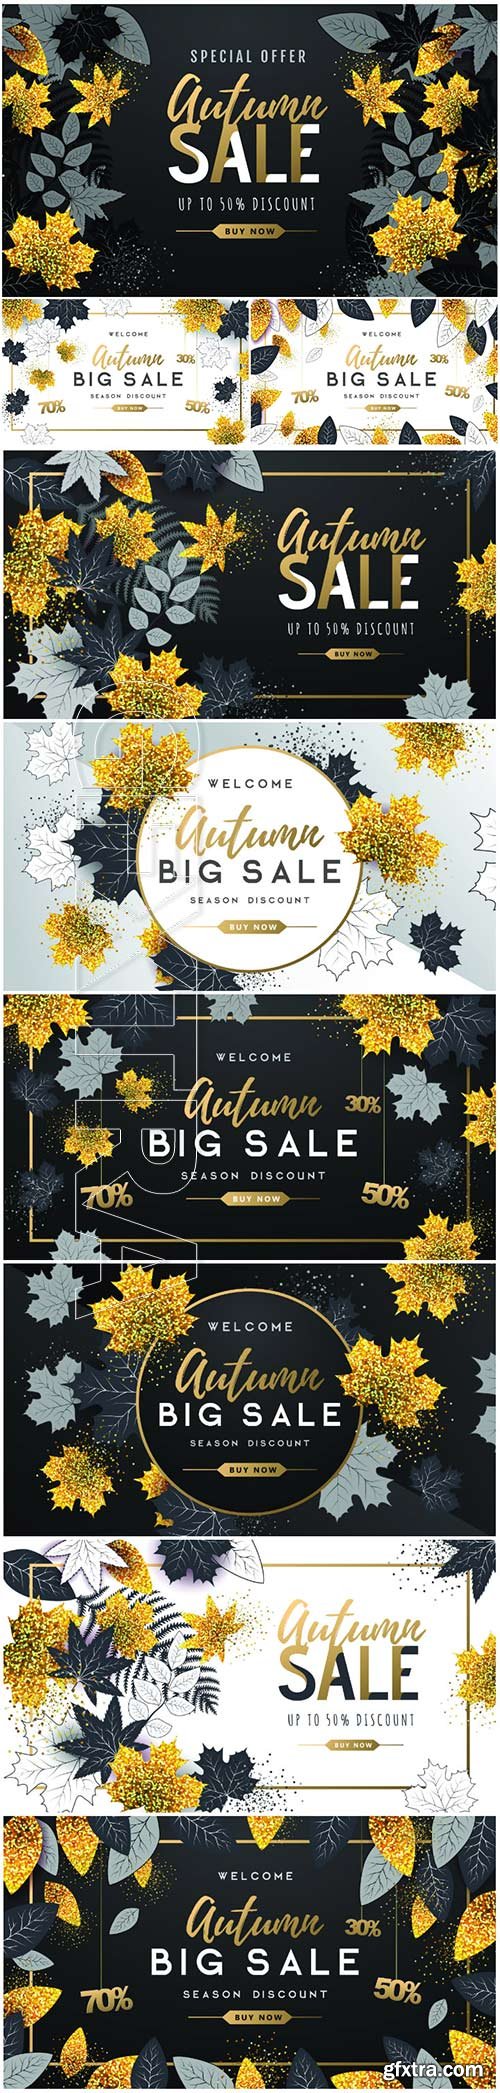 Autumn poster with golden and black autumn leaves